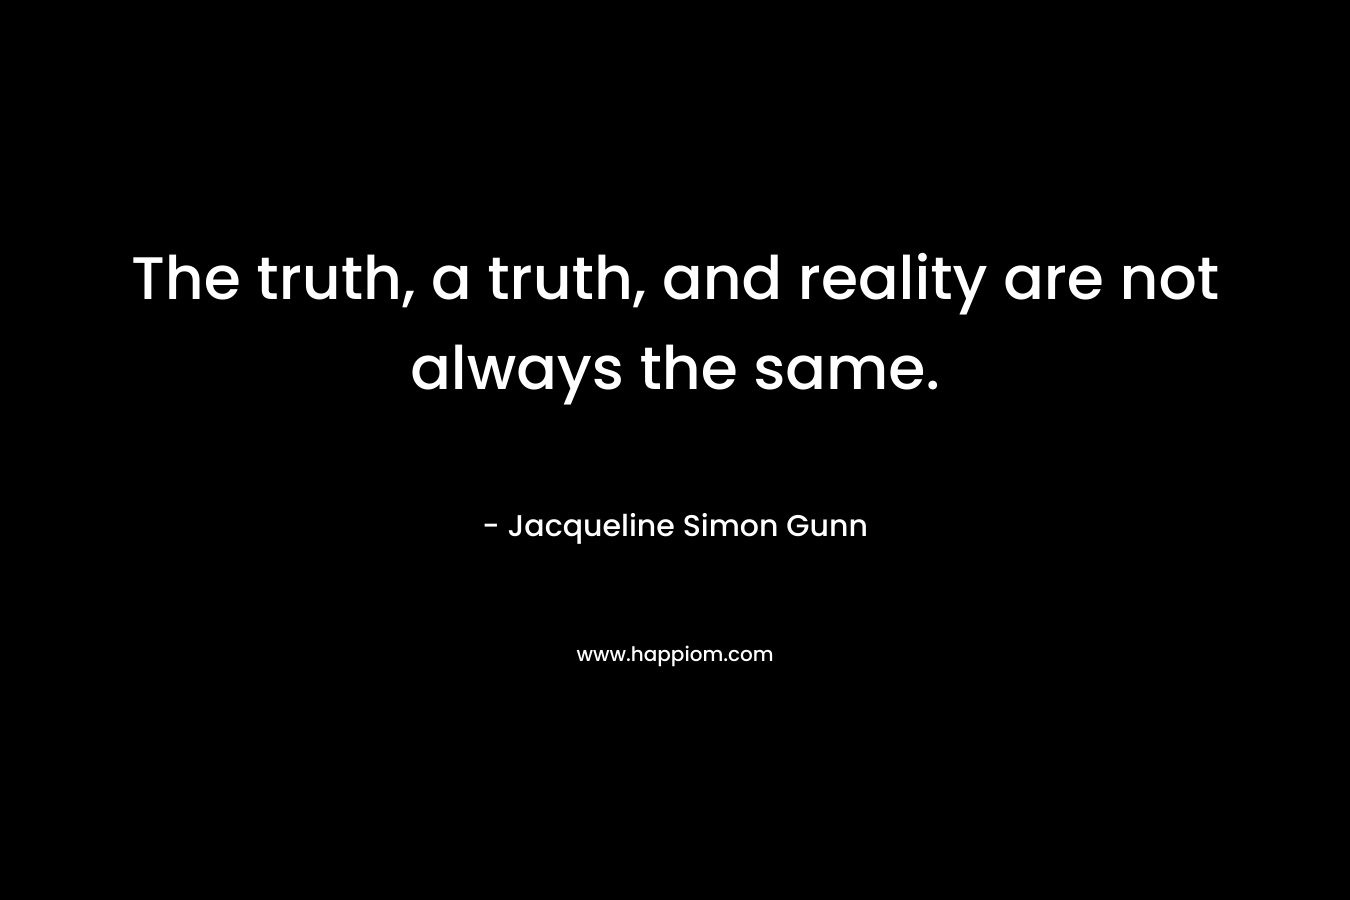 The truth, a truth, and reality are not always the same.